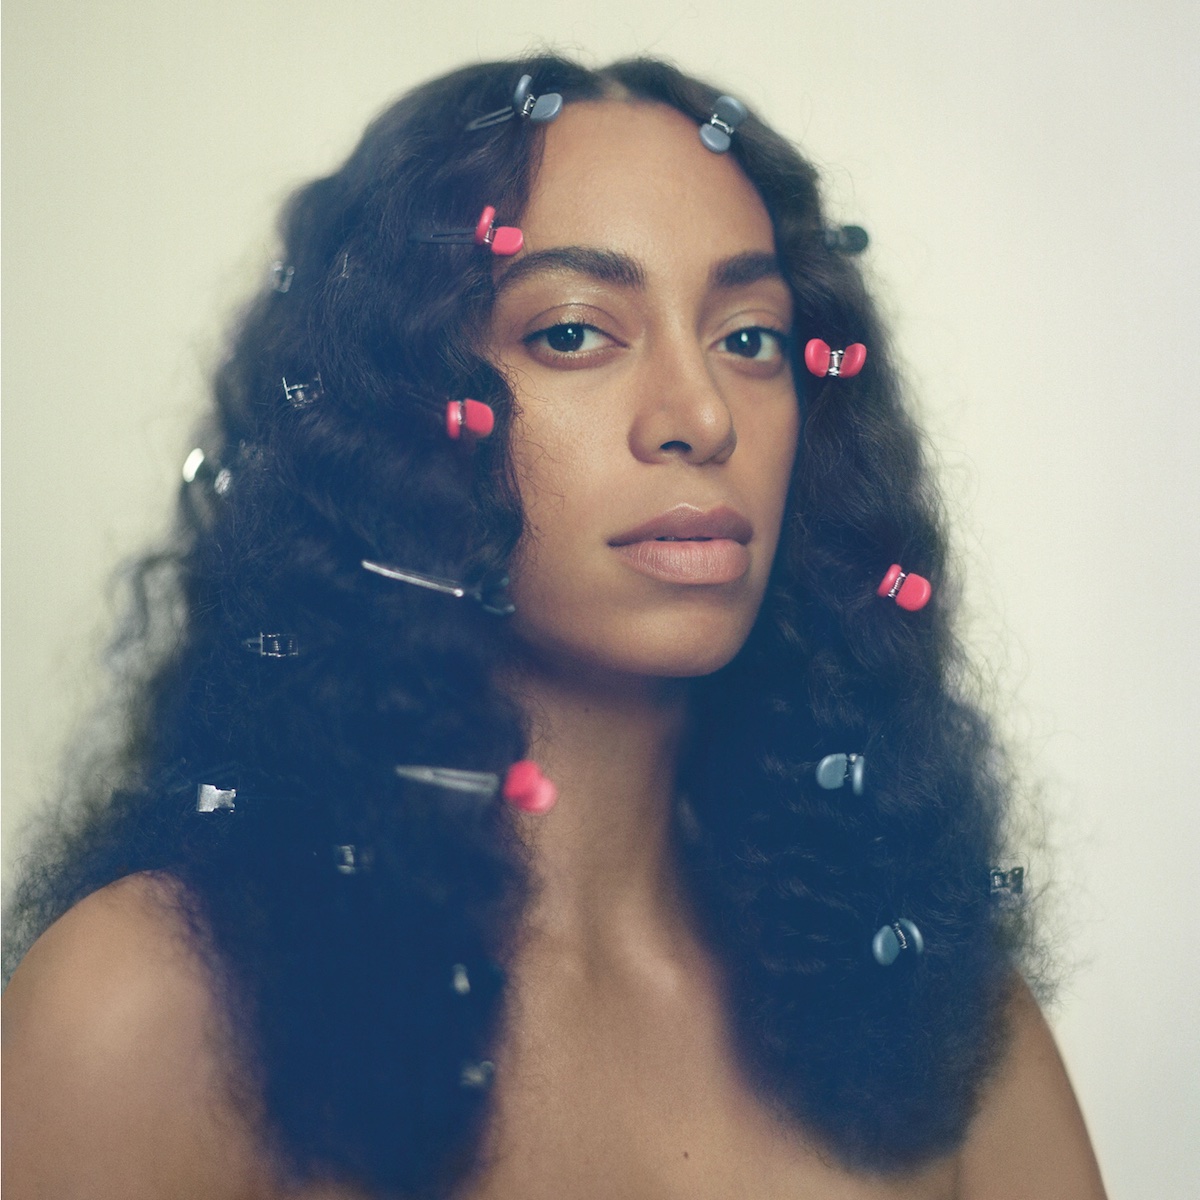 Solange's third album, A Seat at the Table